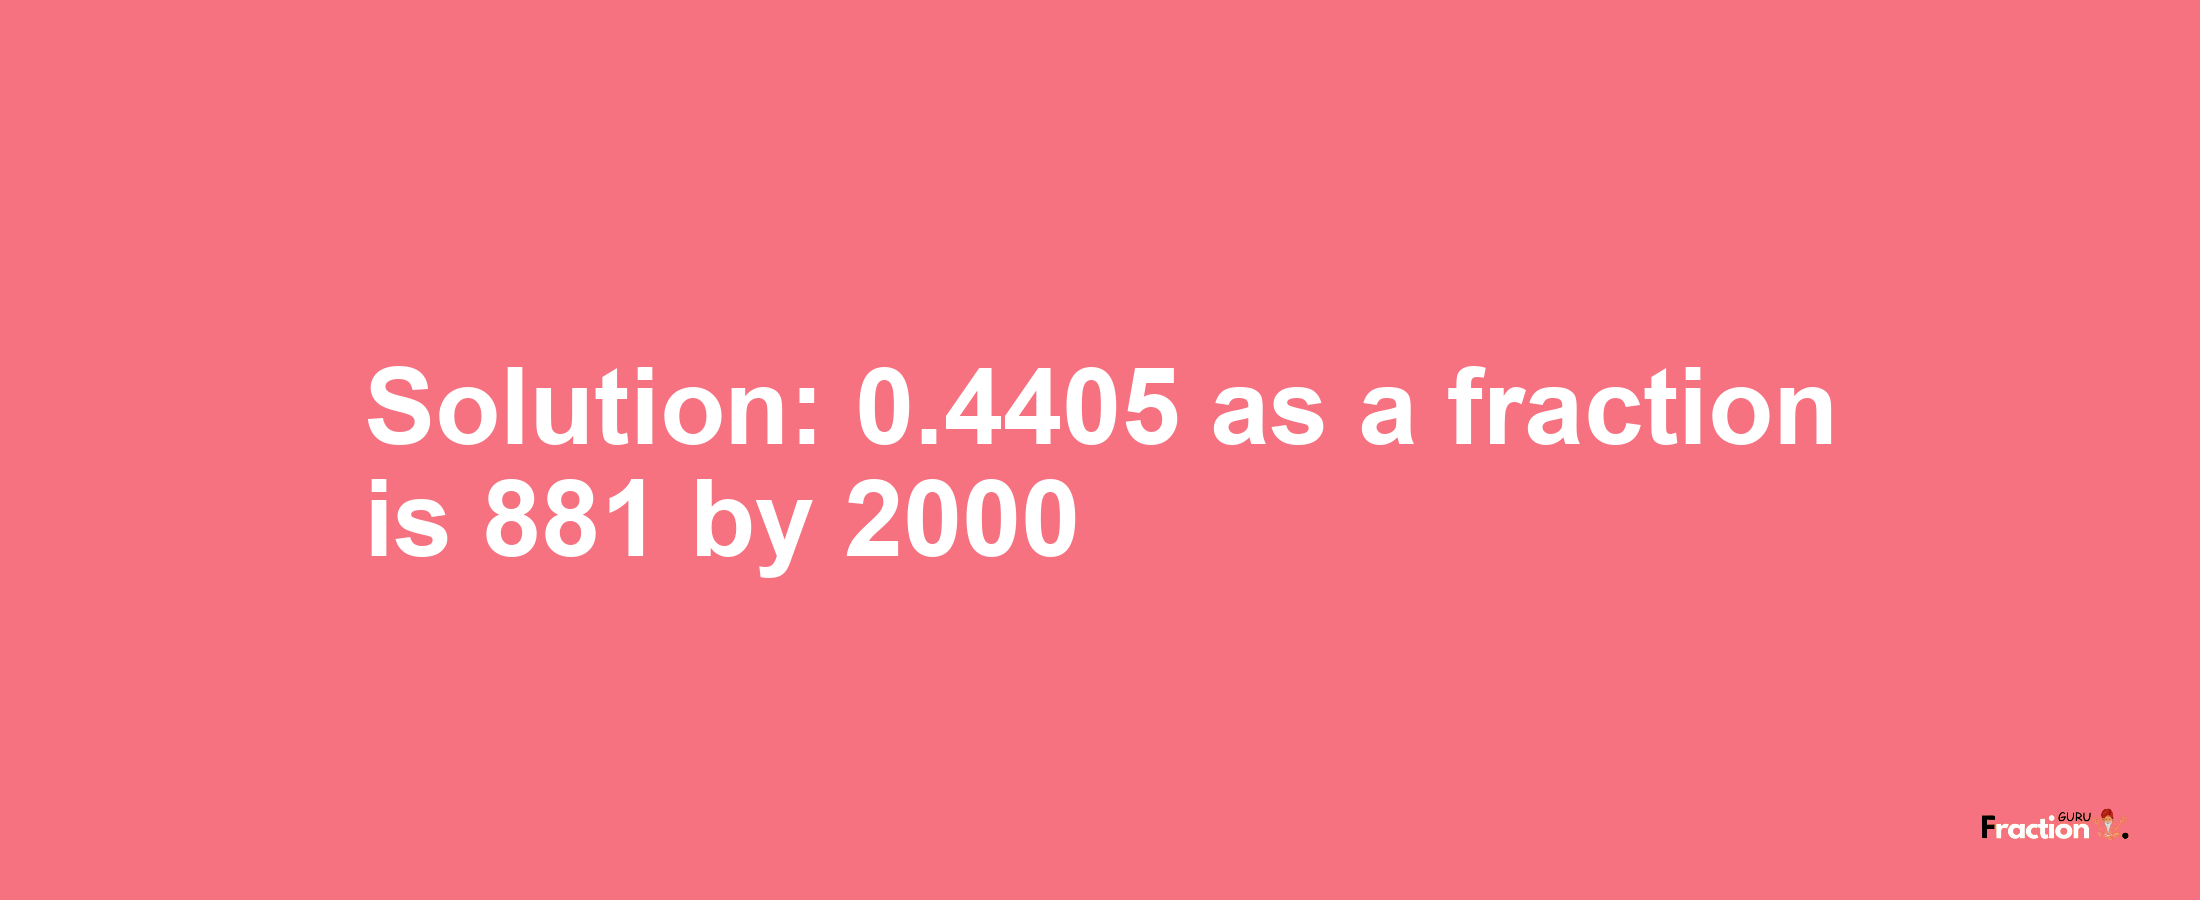 Solution:0.4405 as a fraction is 881/2000